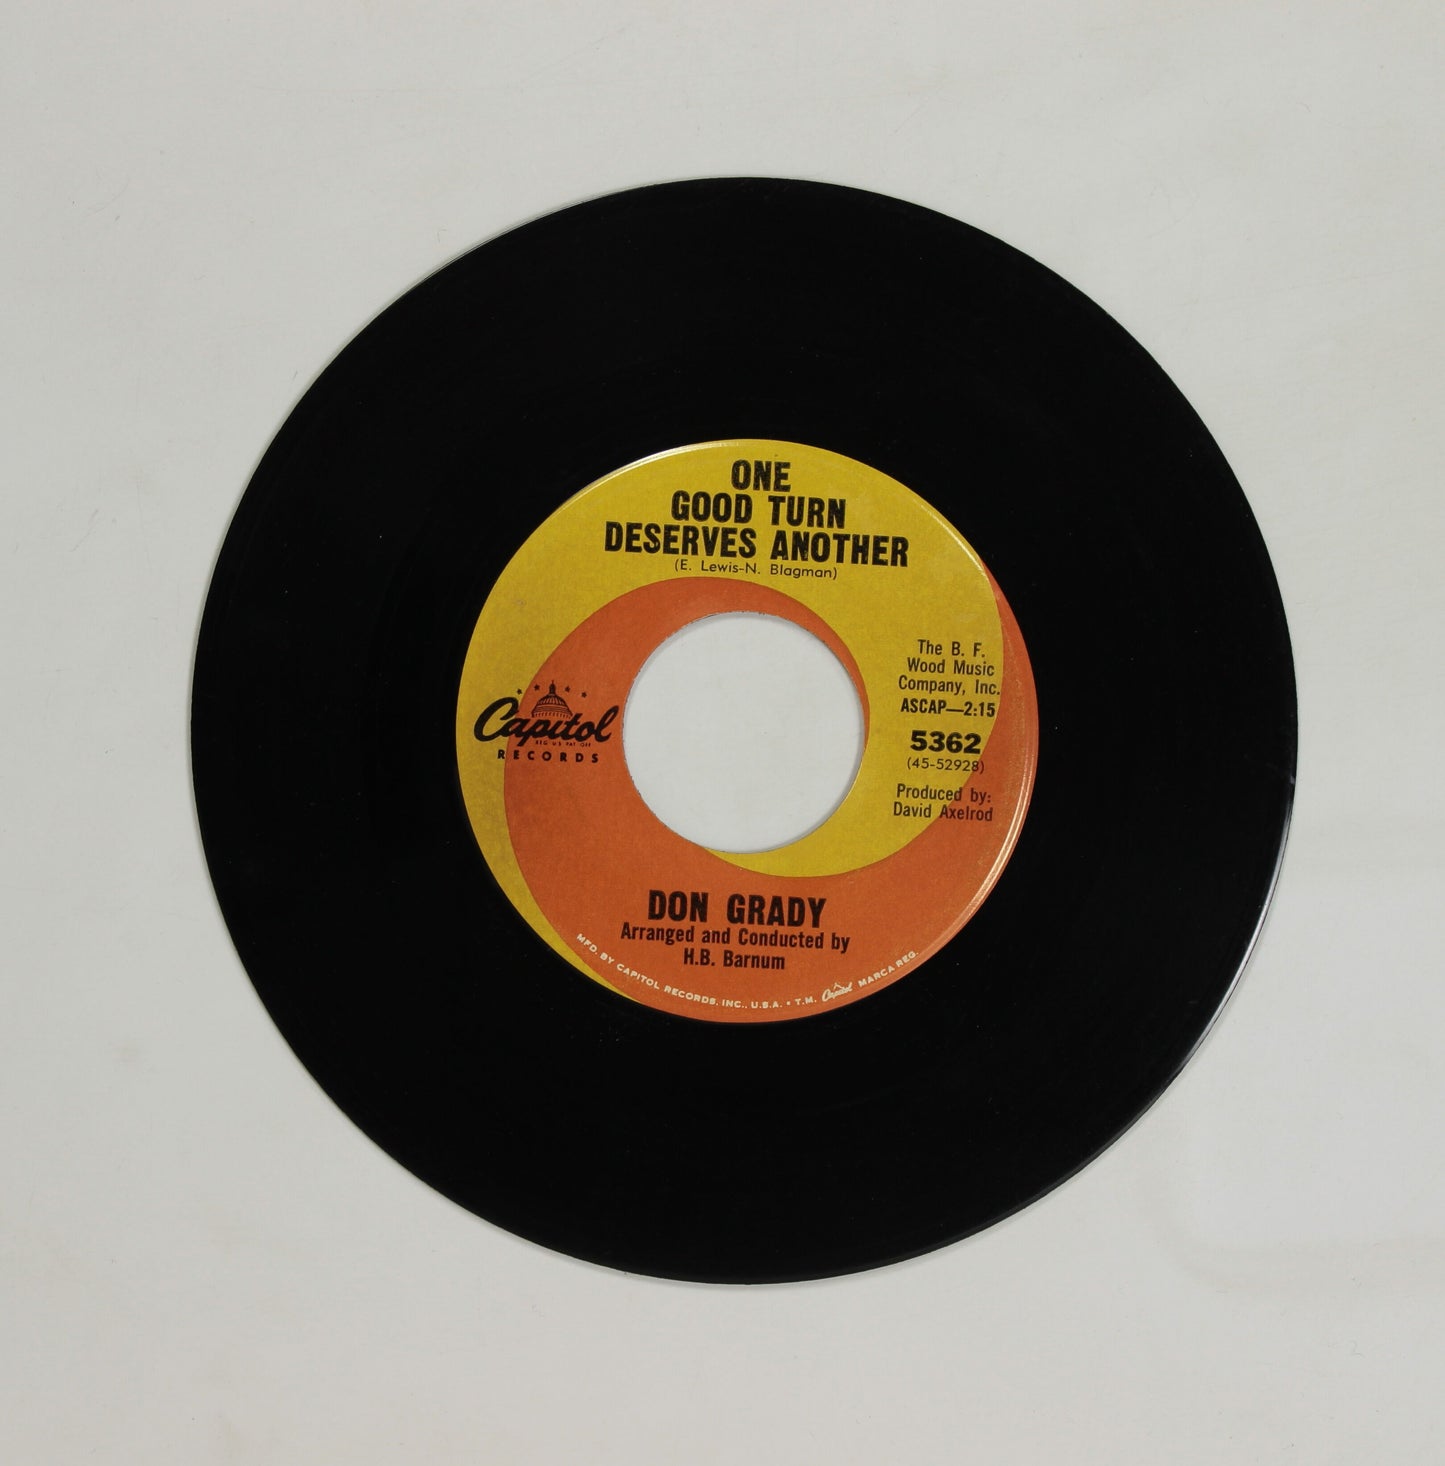 DON GRADY / ONE GOOD TURN DESERVES ANOTHER / IT'S BETTER THIS WAY